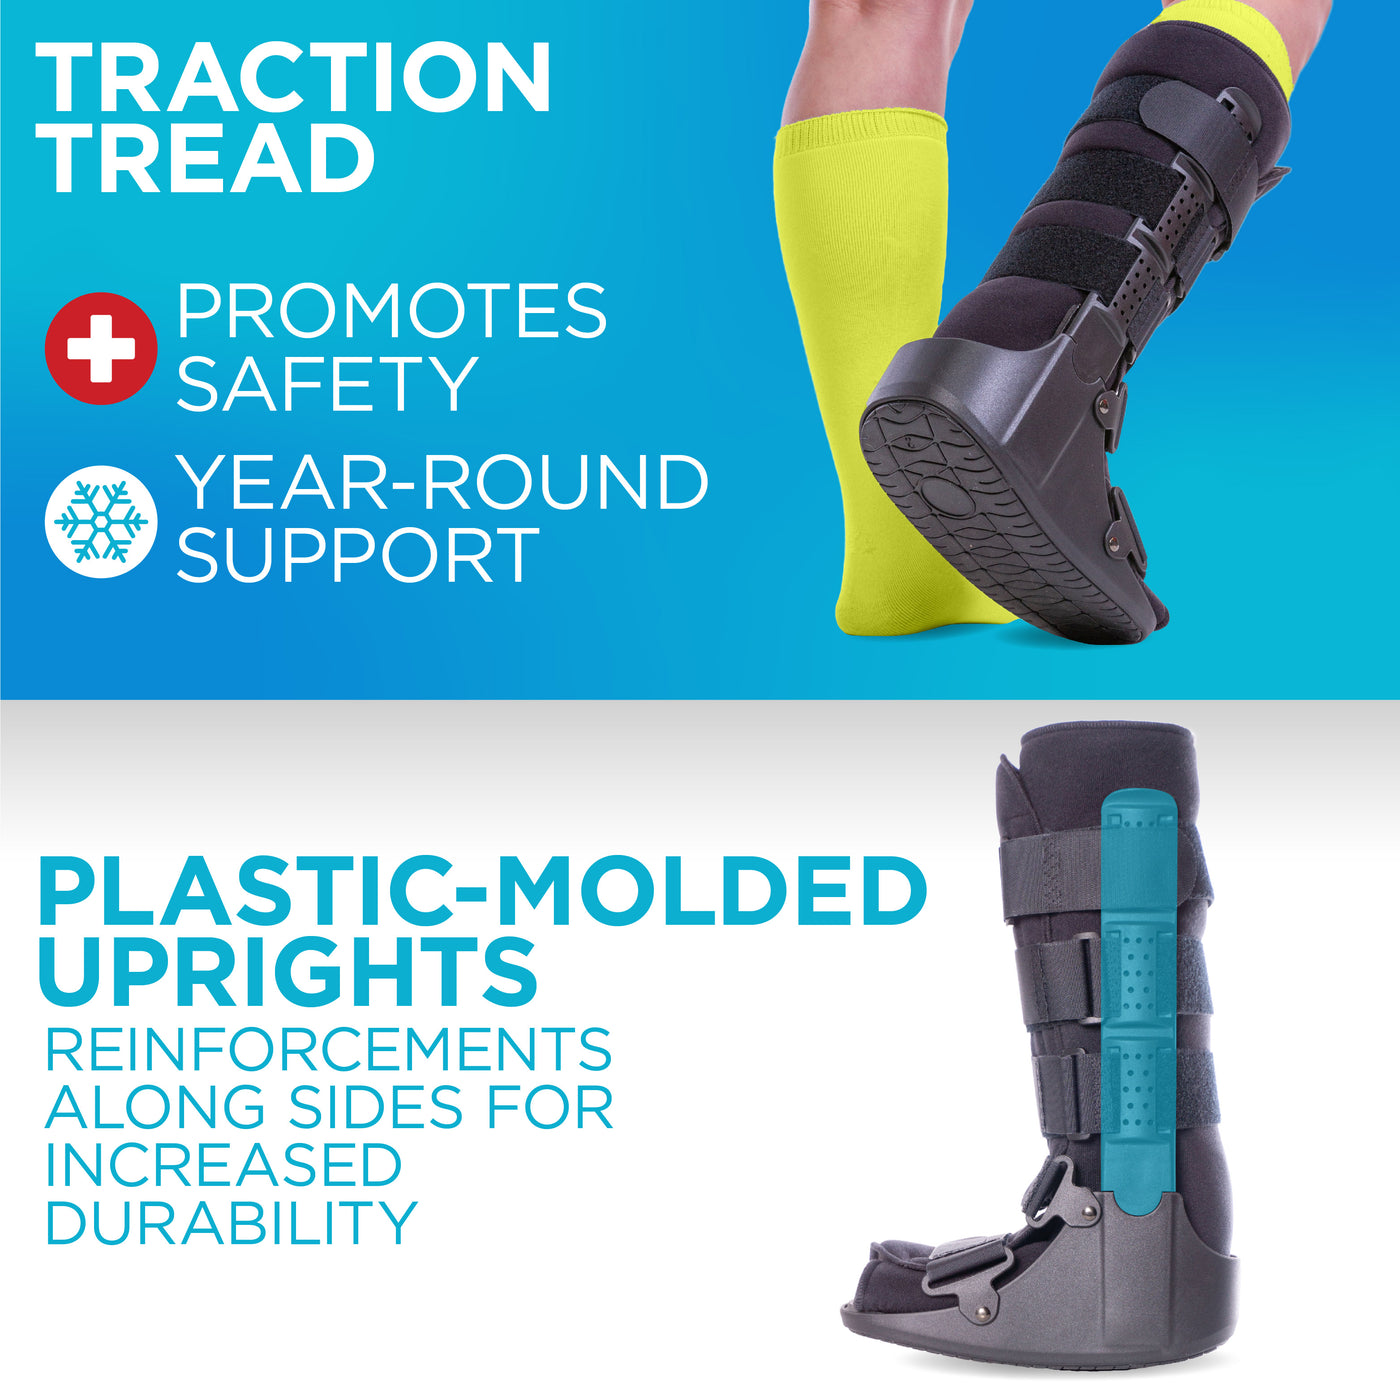 The pneumatic walking boot for a broken ankle has traction tread for year-round support